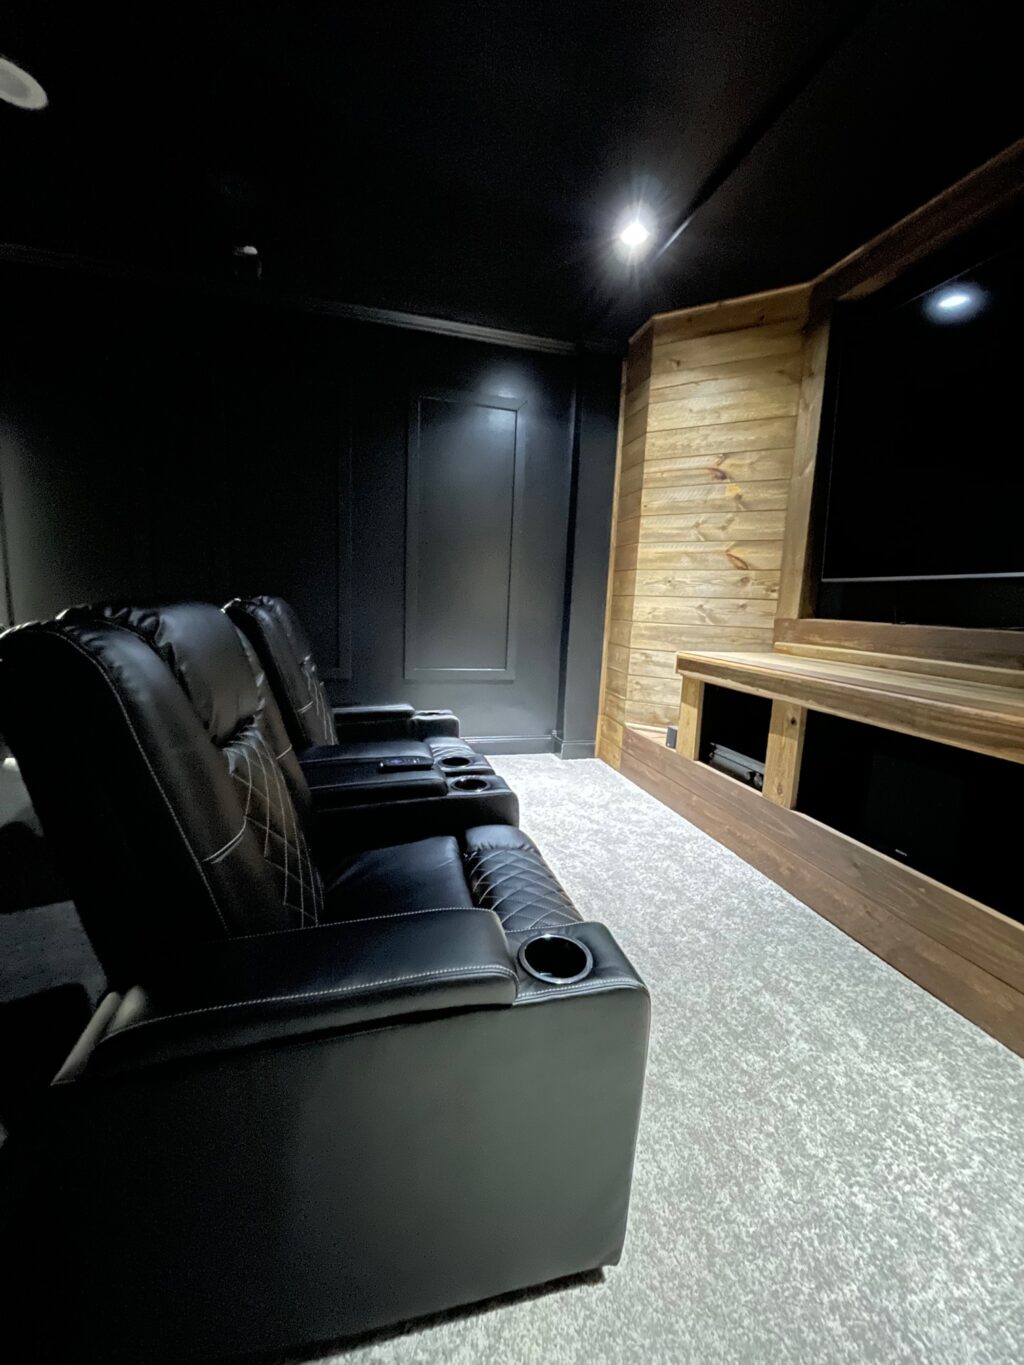 media room with black recliners